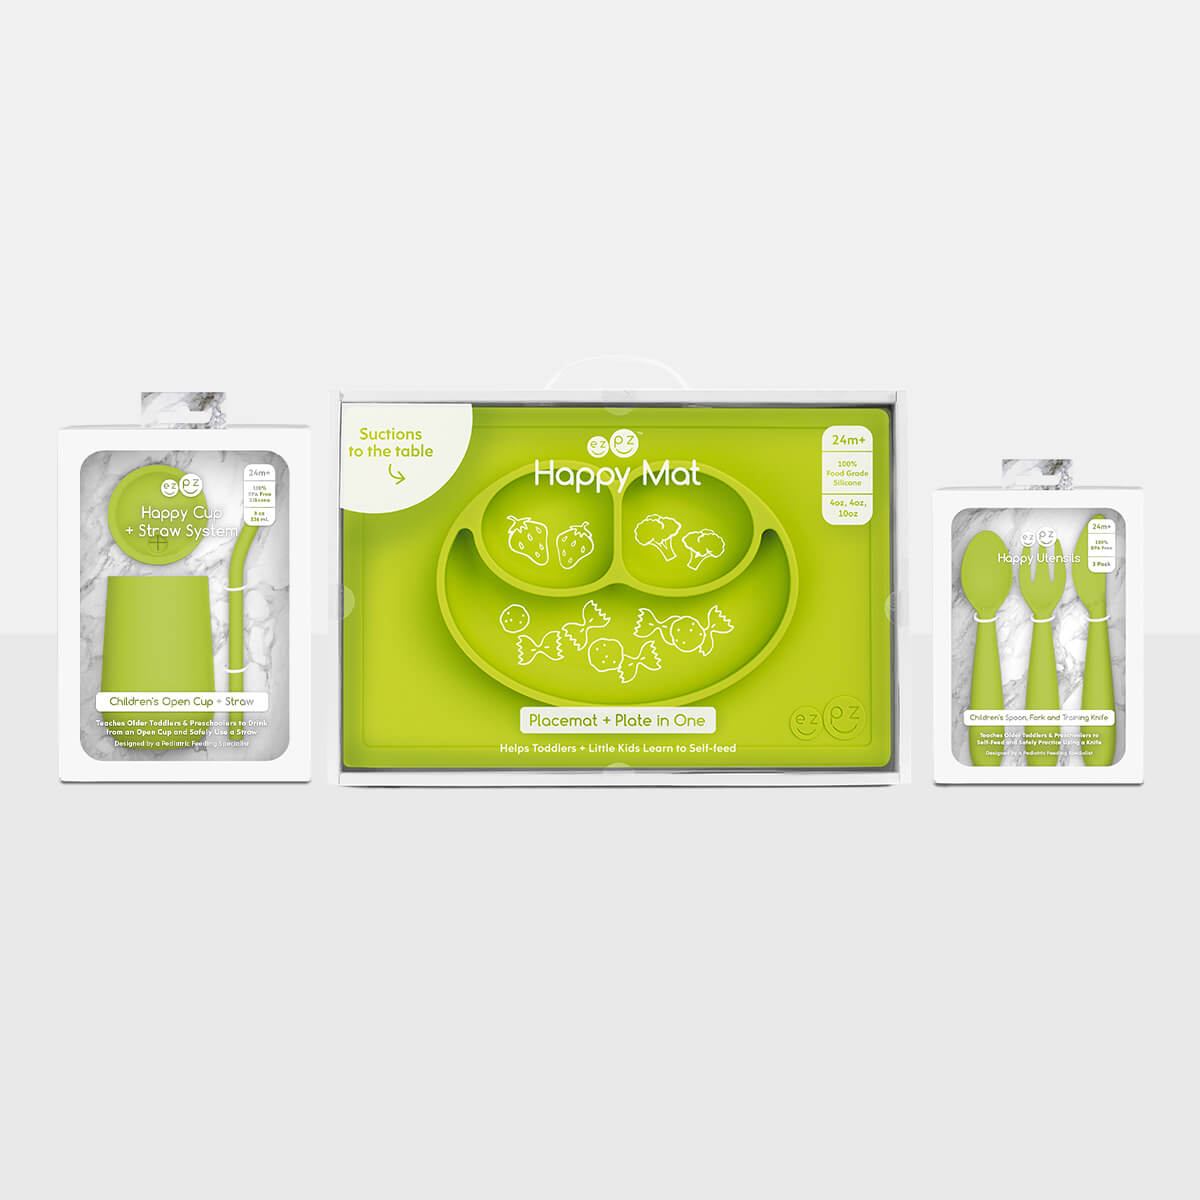 ezpz Happy Feeding Set in Lime / Silicone, Self-Suctioning Plate, Silicone Cup and Straw, Training Utensils for Toddlers